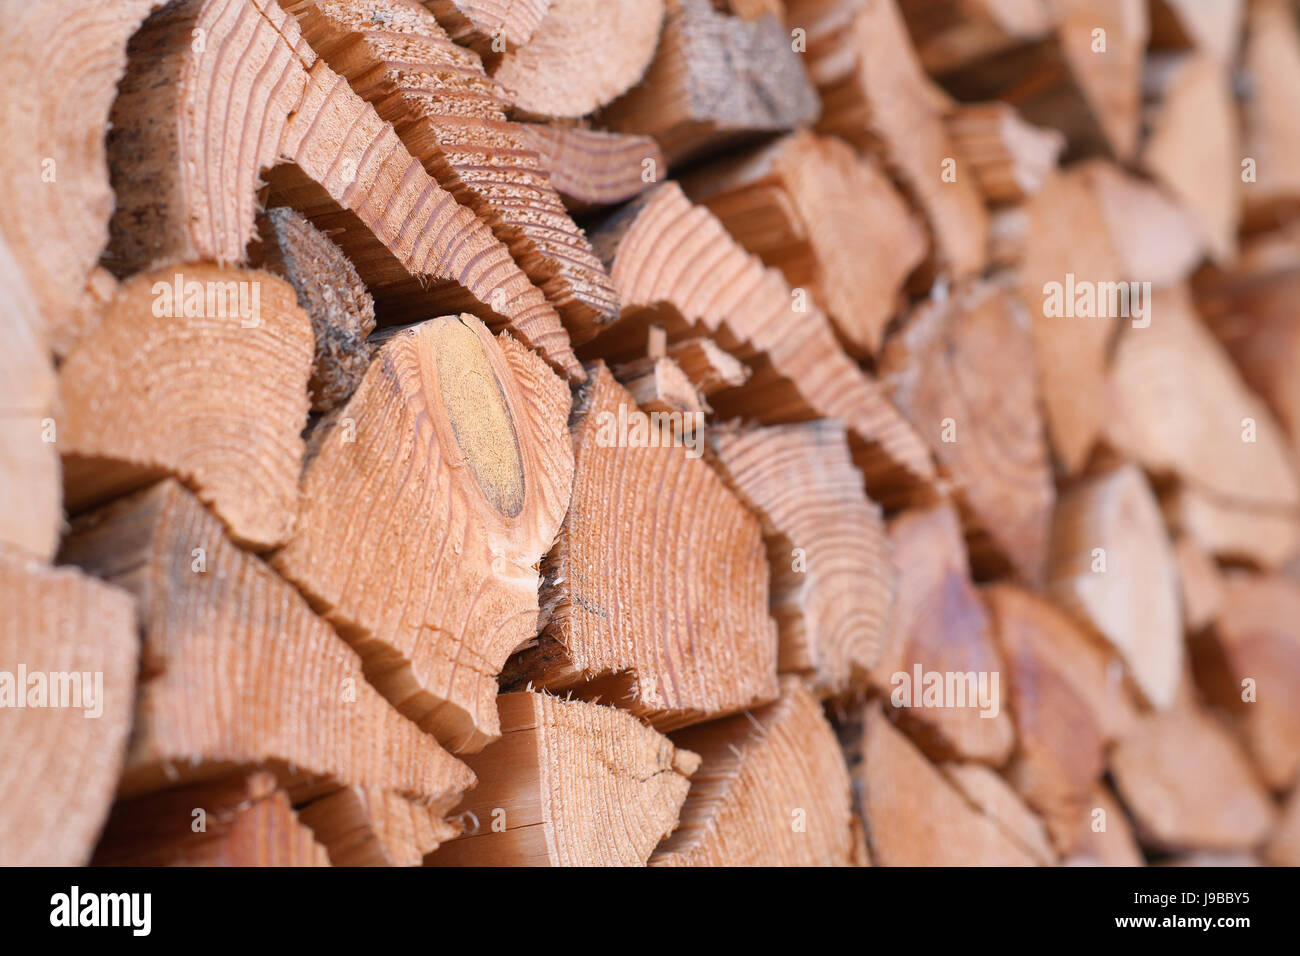 wood, stack, raw material, heat, building material, warmth, life, exist, Stock Photo